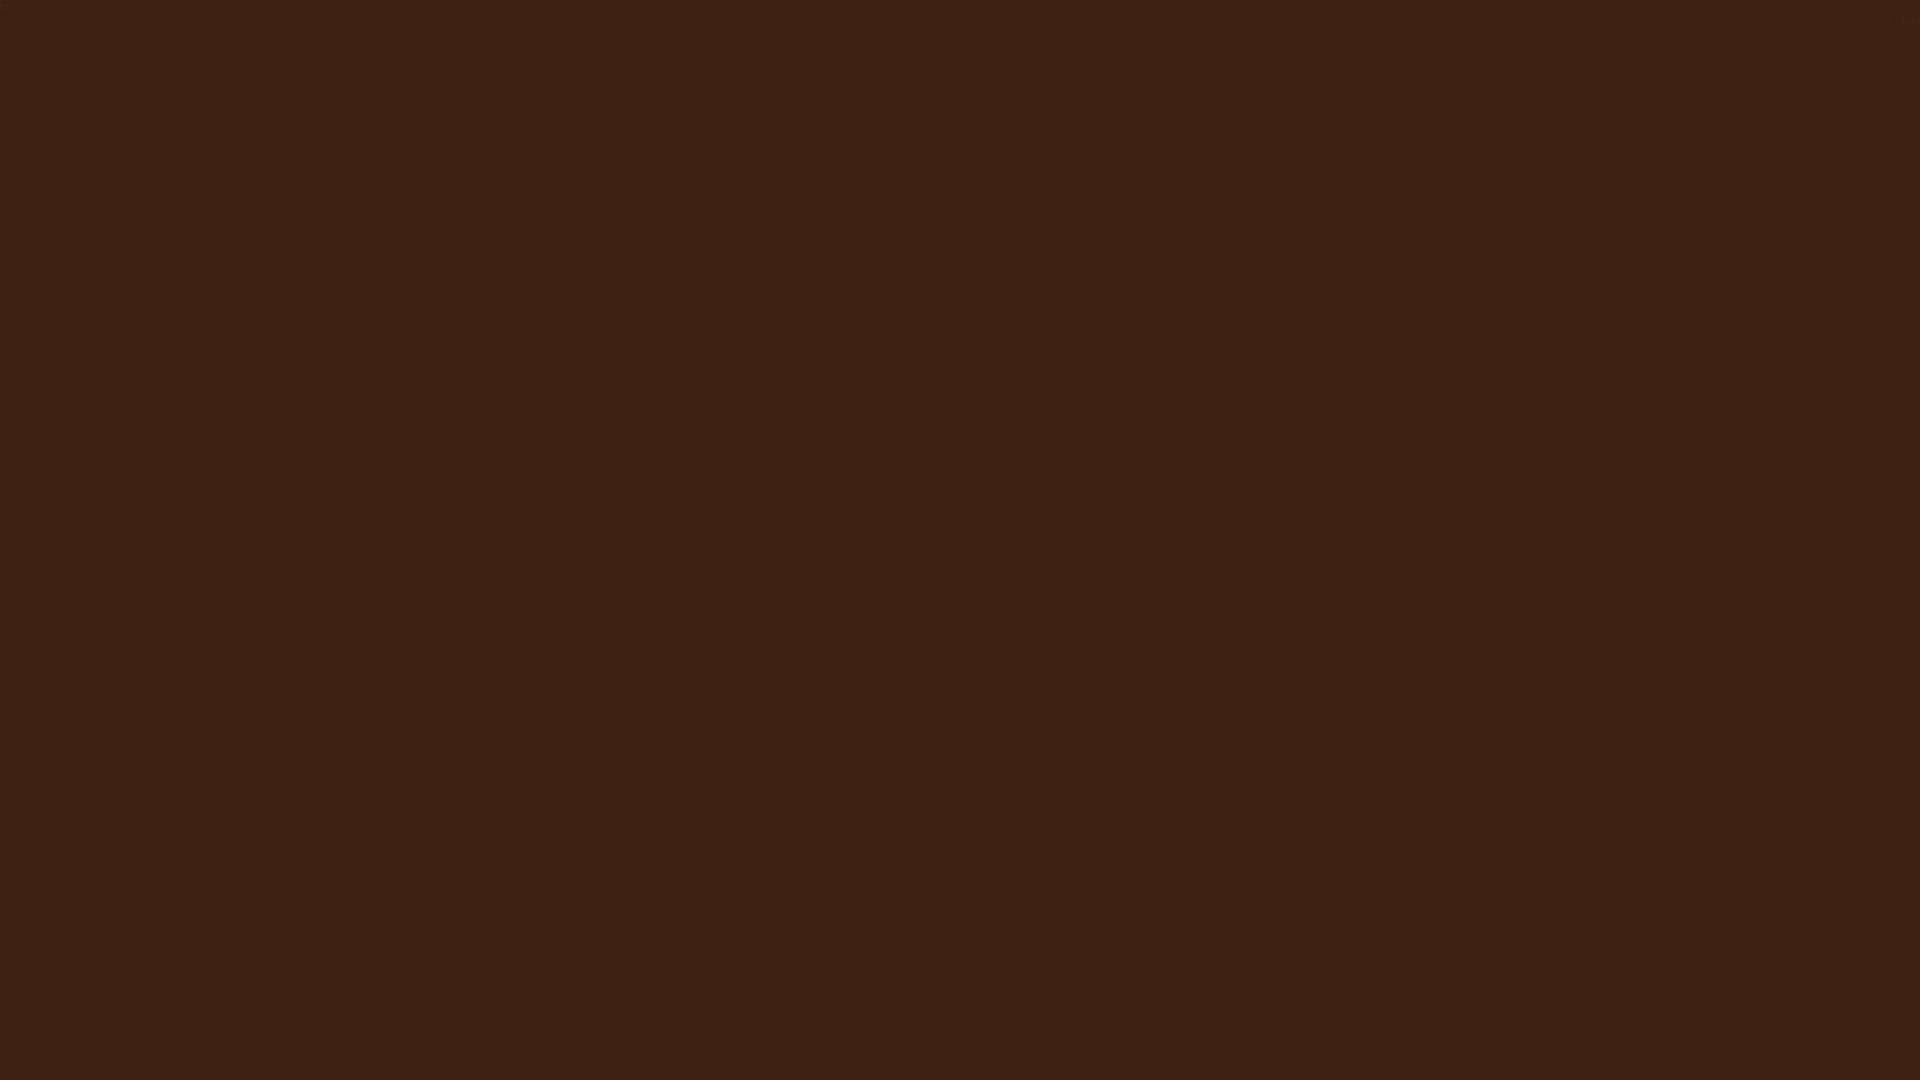 Plain Chocolate Brown Background HD Brown Aesthetic Wallpaper